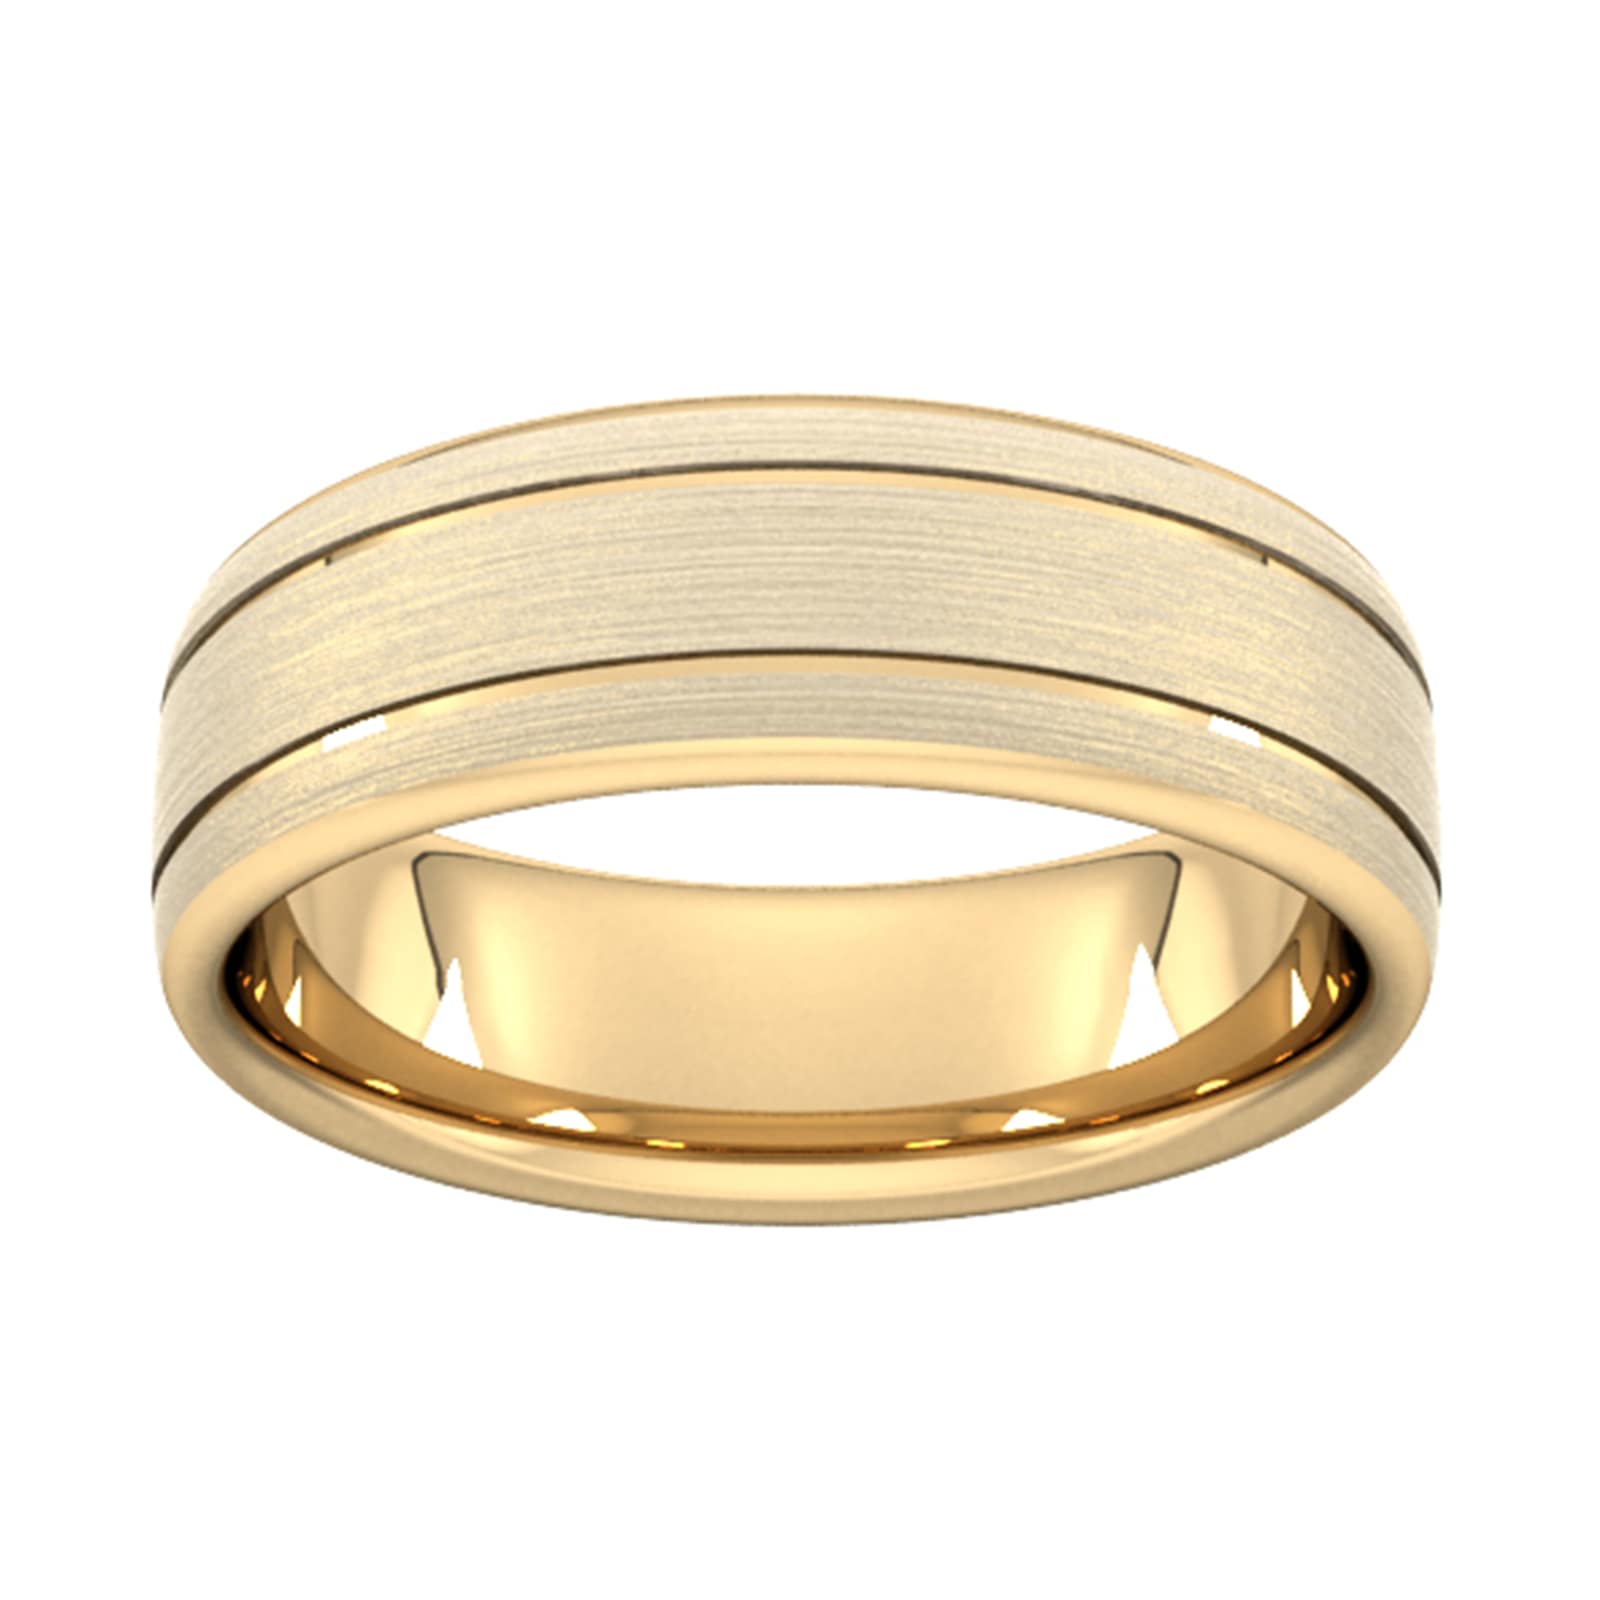 7mm D Shape Standard Matt Finish With Double Grooves Wedding Ring In 9 Carat Yellow Gold - Ring Size Z